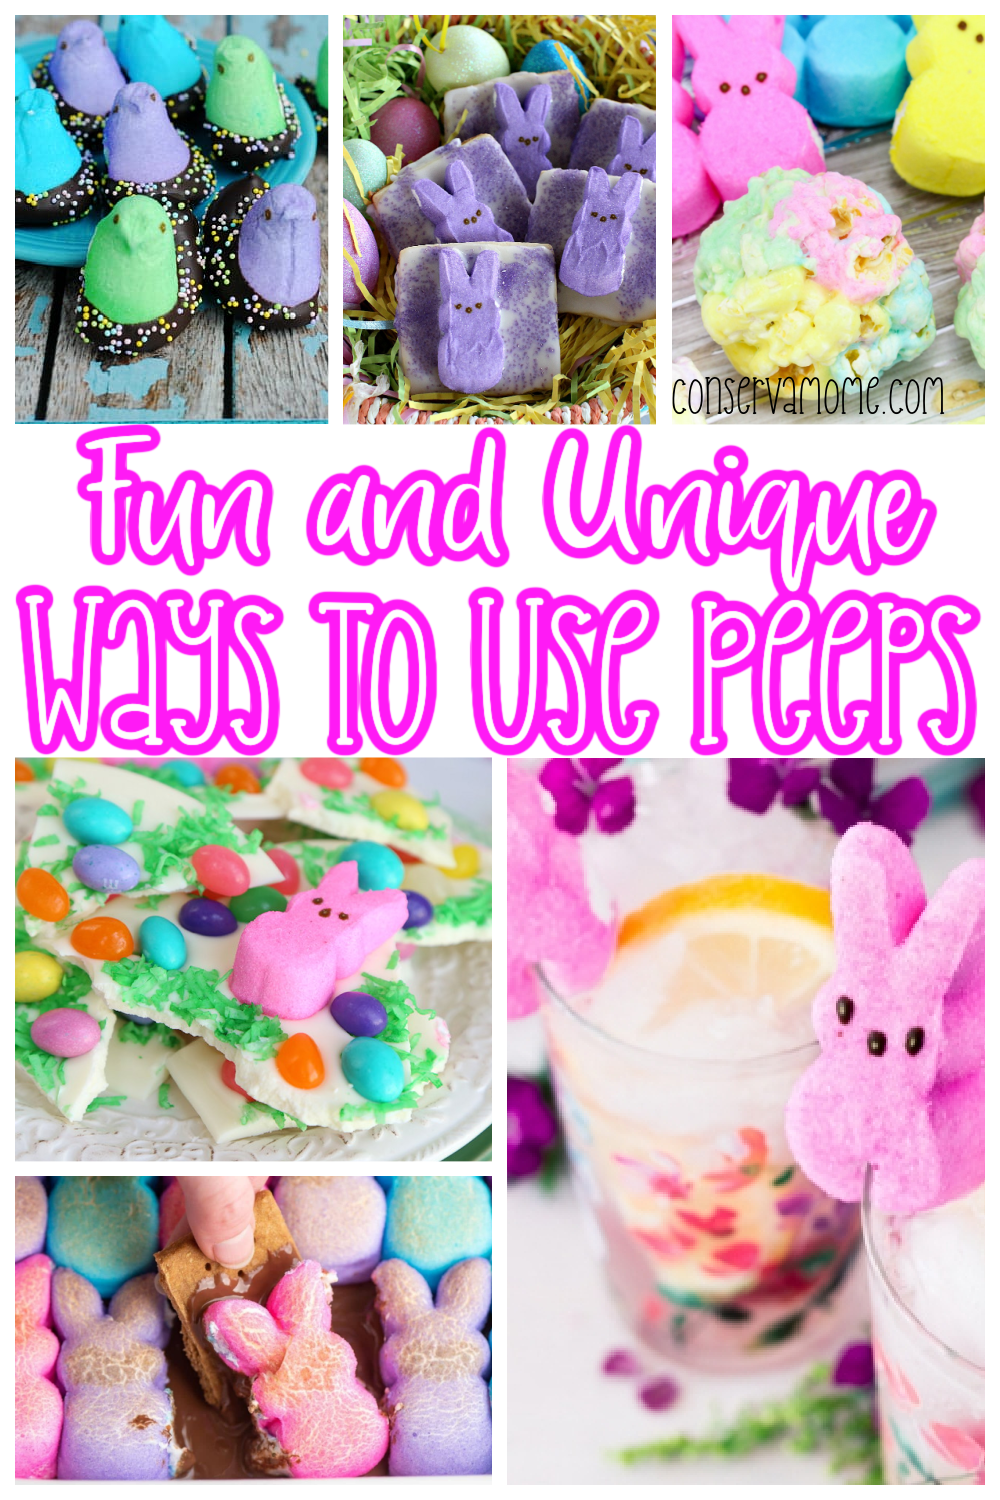 Fun and Unique ways to Use Peeps